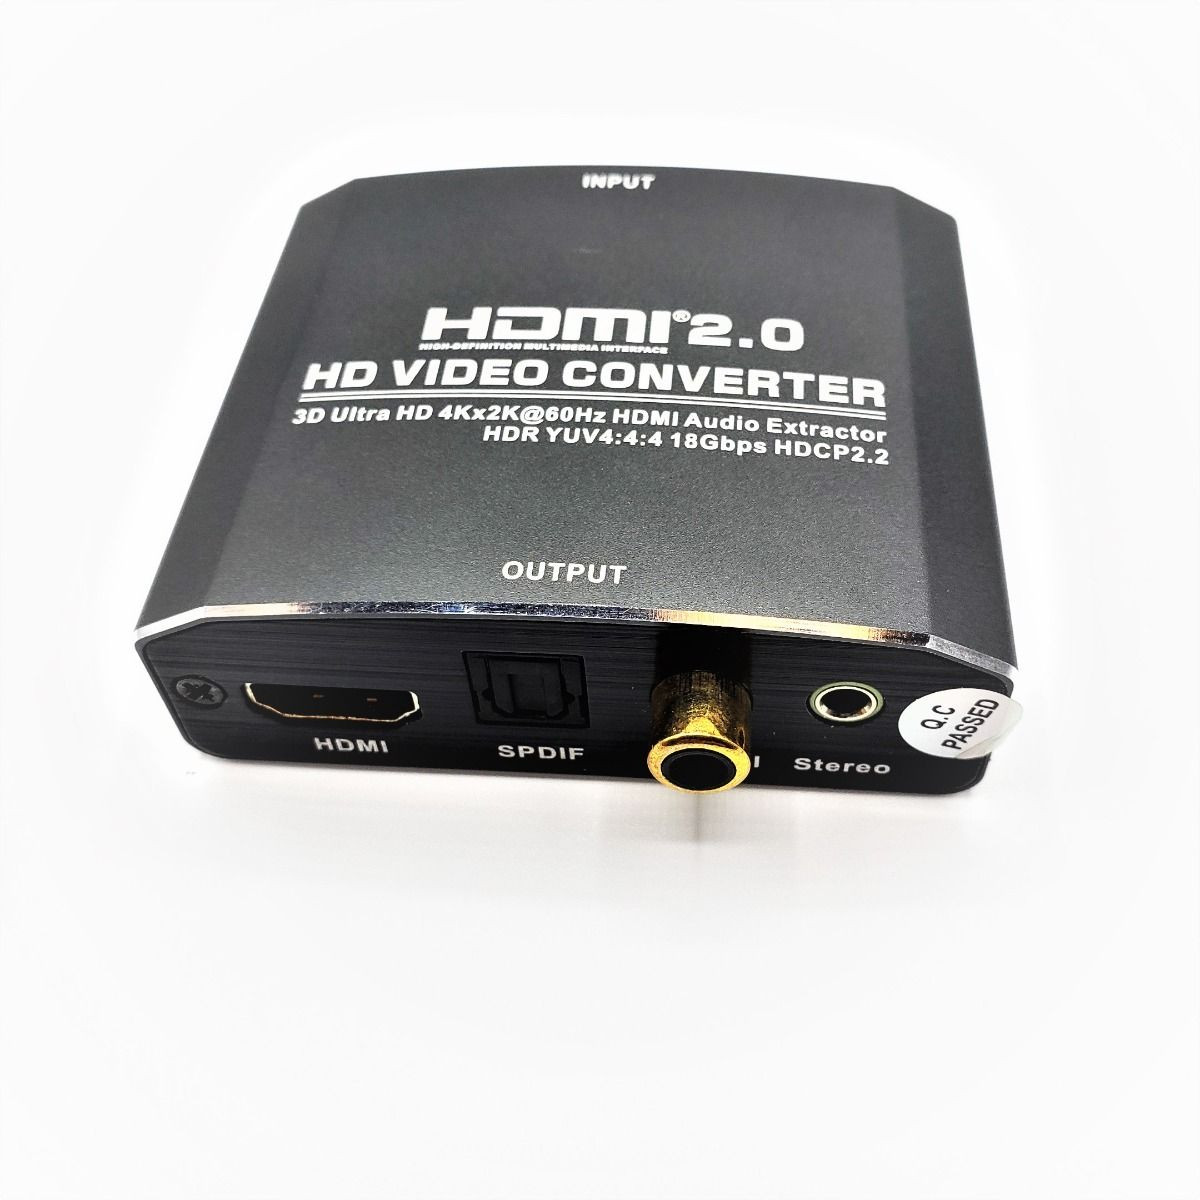 HDMI Converter - Front View